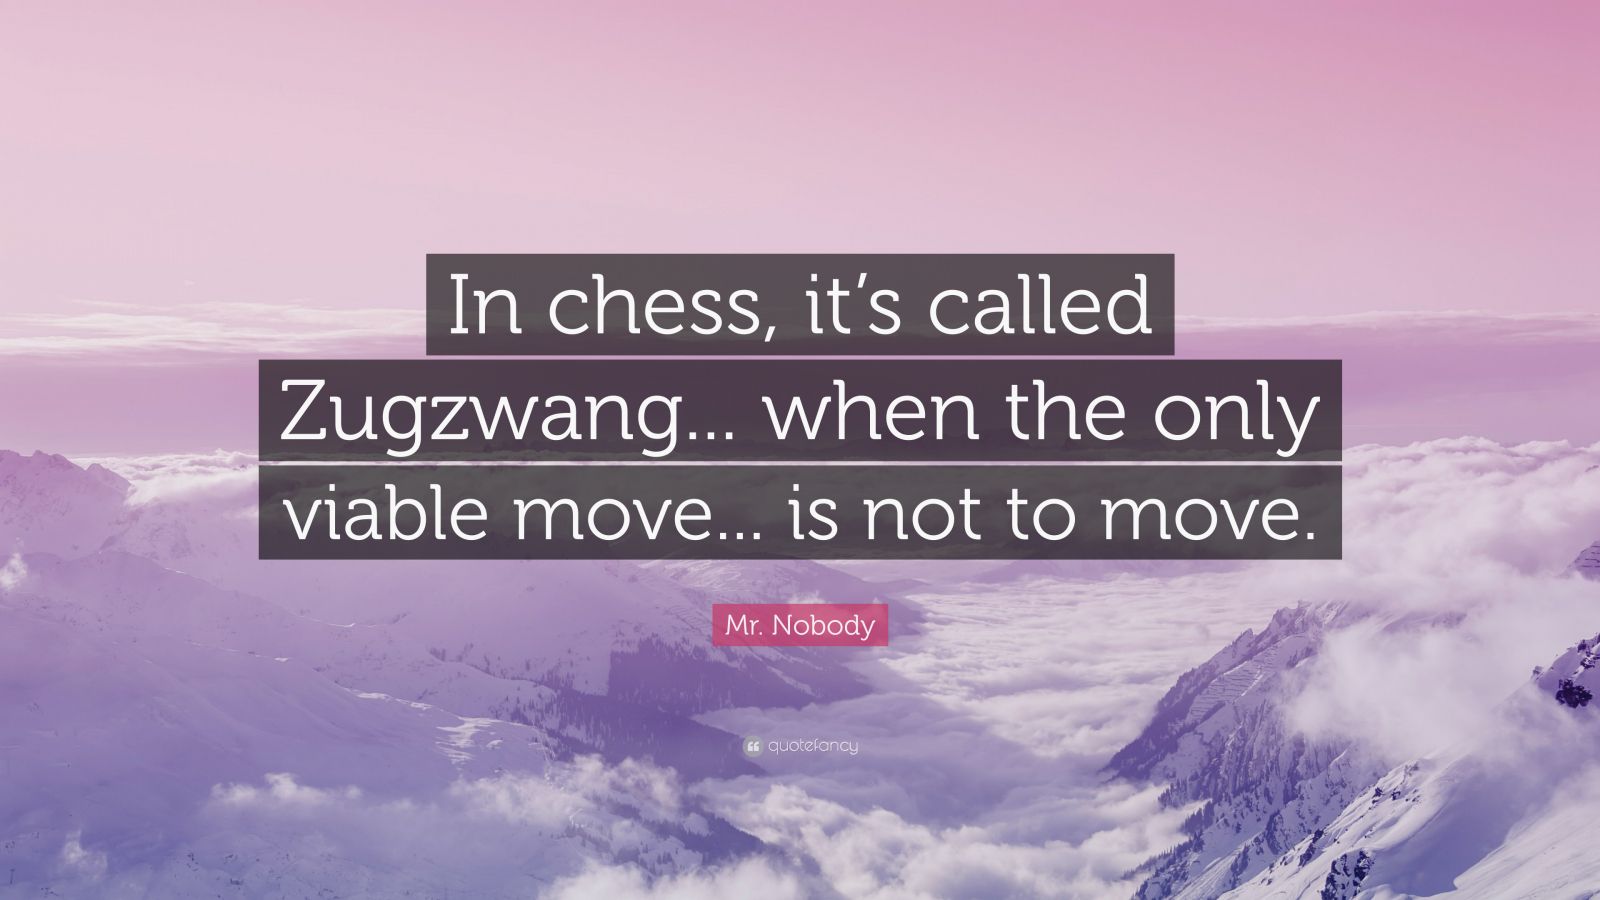 Zugzwang (n) when the best viable move is not to move  Poster for